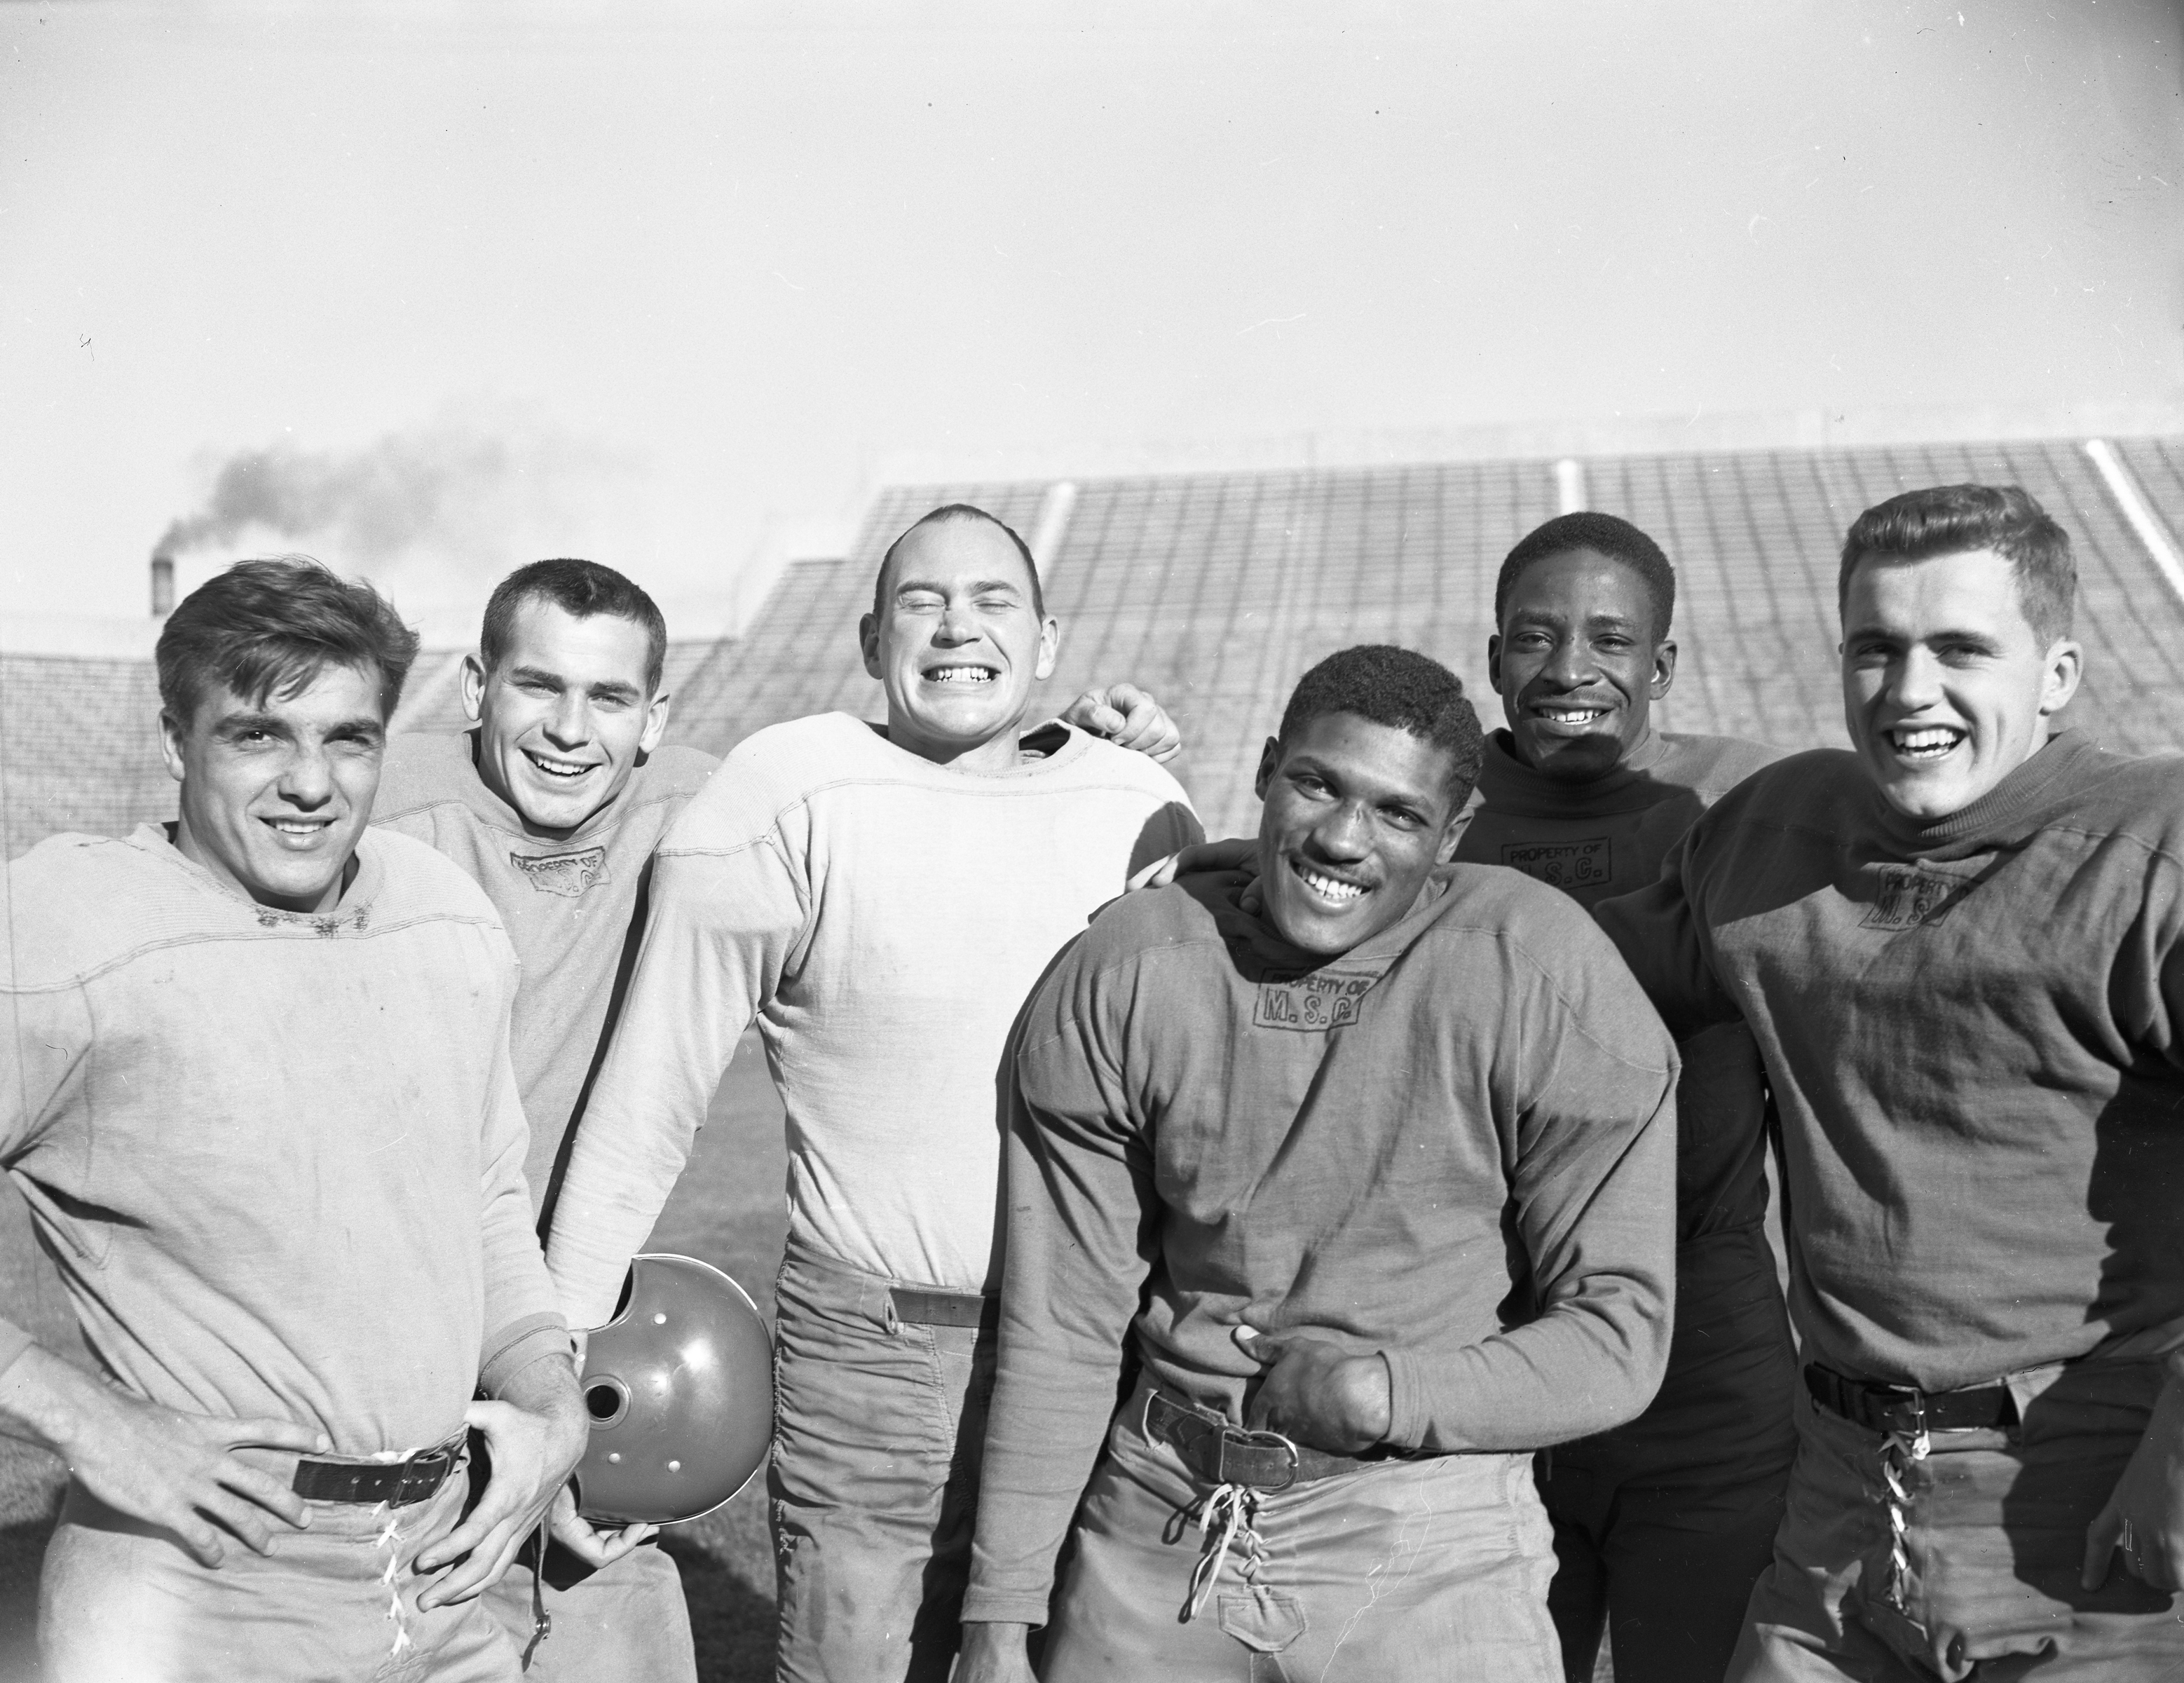 A group photograph of six football players. Second from the right is Willie Thrower. Others not identified.